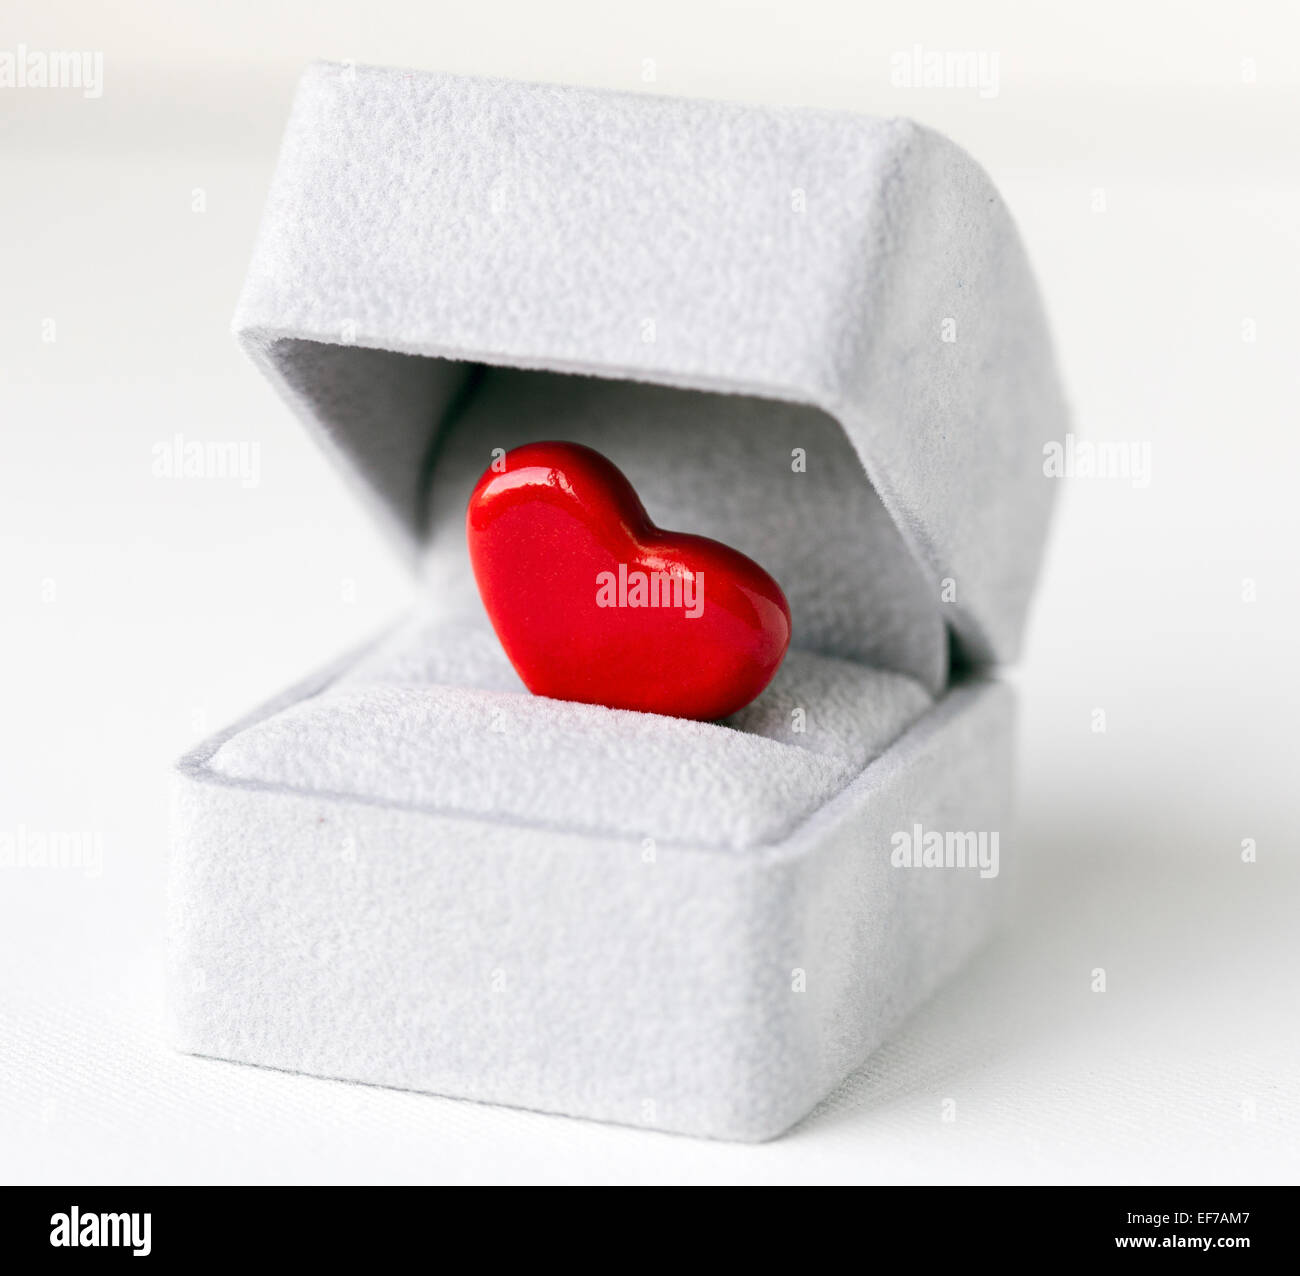 An image of a bright red ceramic heart inside a grey jewelry box, symbolizing a romantic proposal Stock Photo